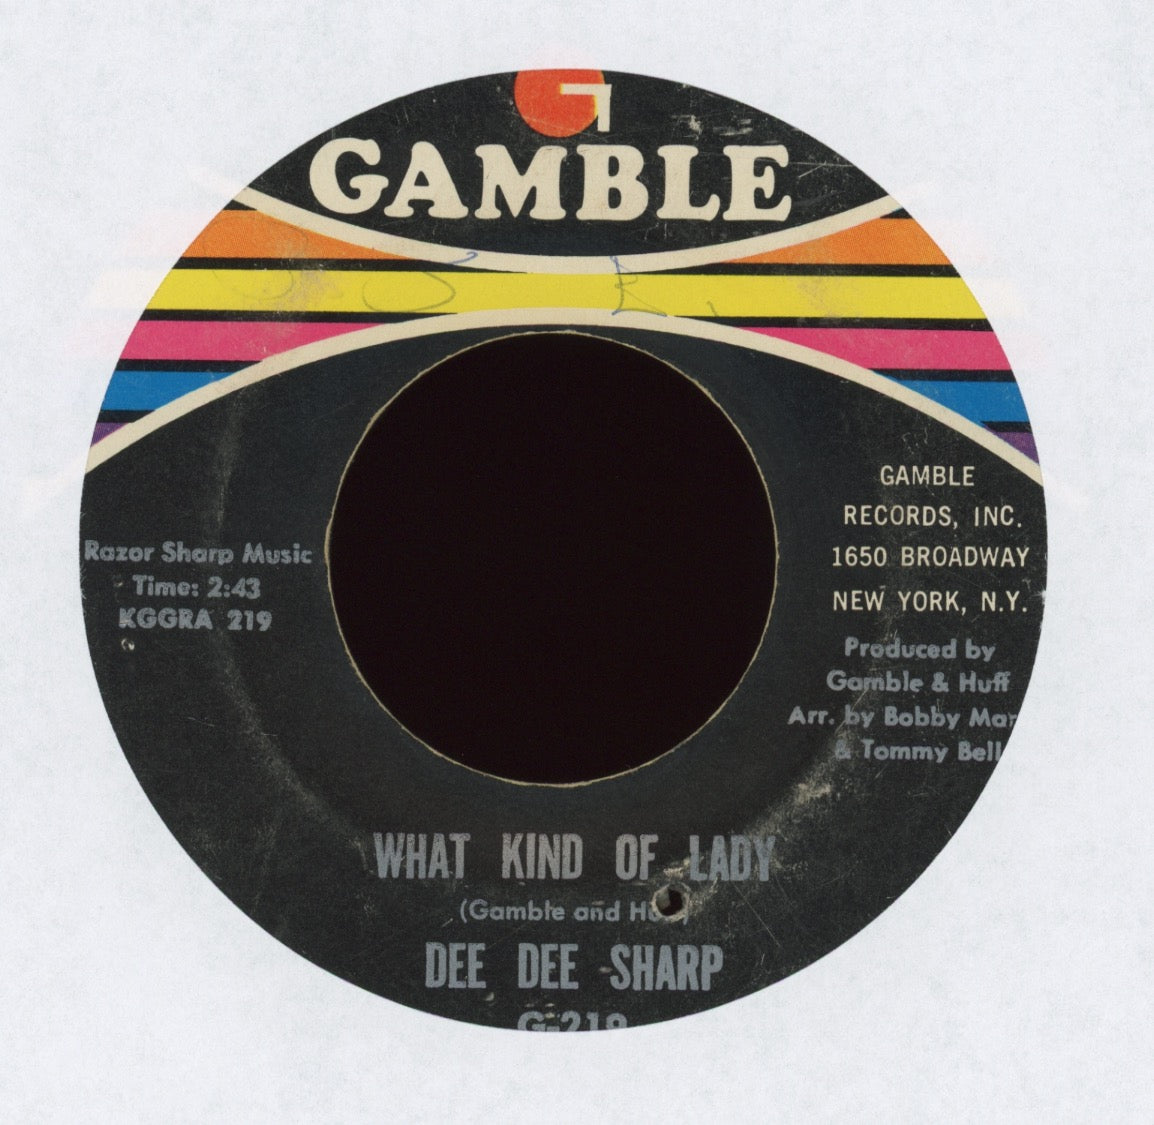 Dee Dee Sharp - What Kind Of Lady on Gamble